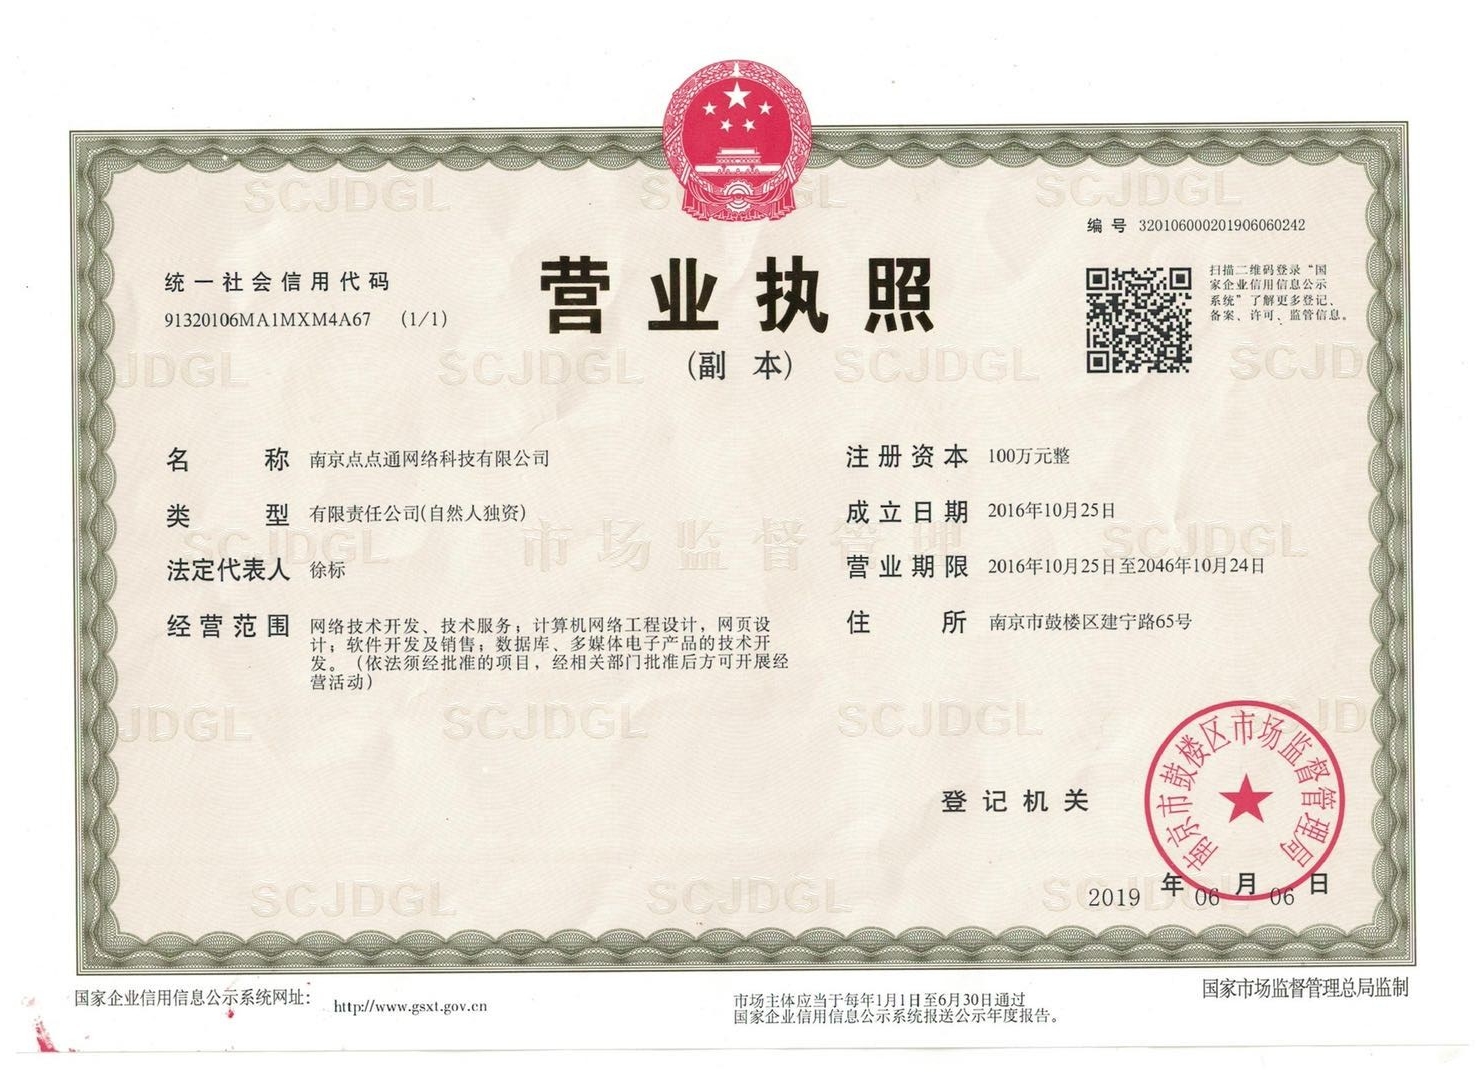 Zhongheng micro semiconductor officially obtained iatf16949 system certification and national high tech enterprise certificate